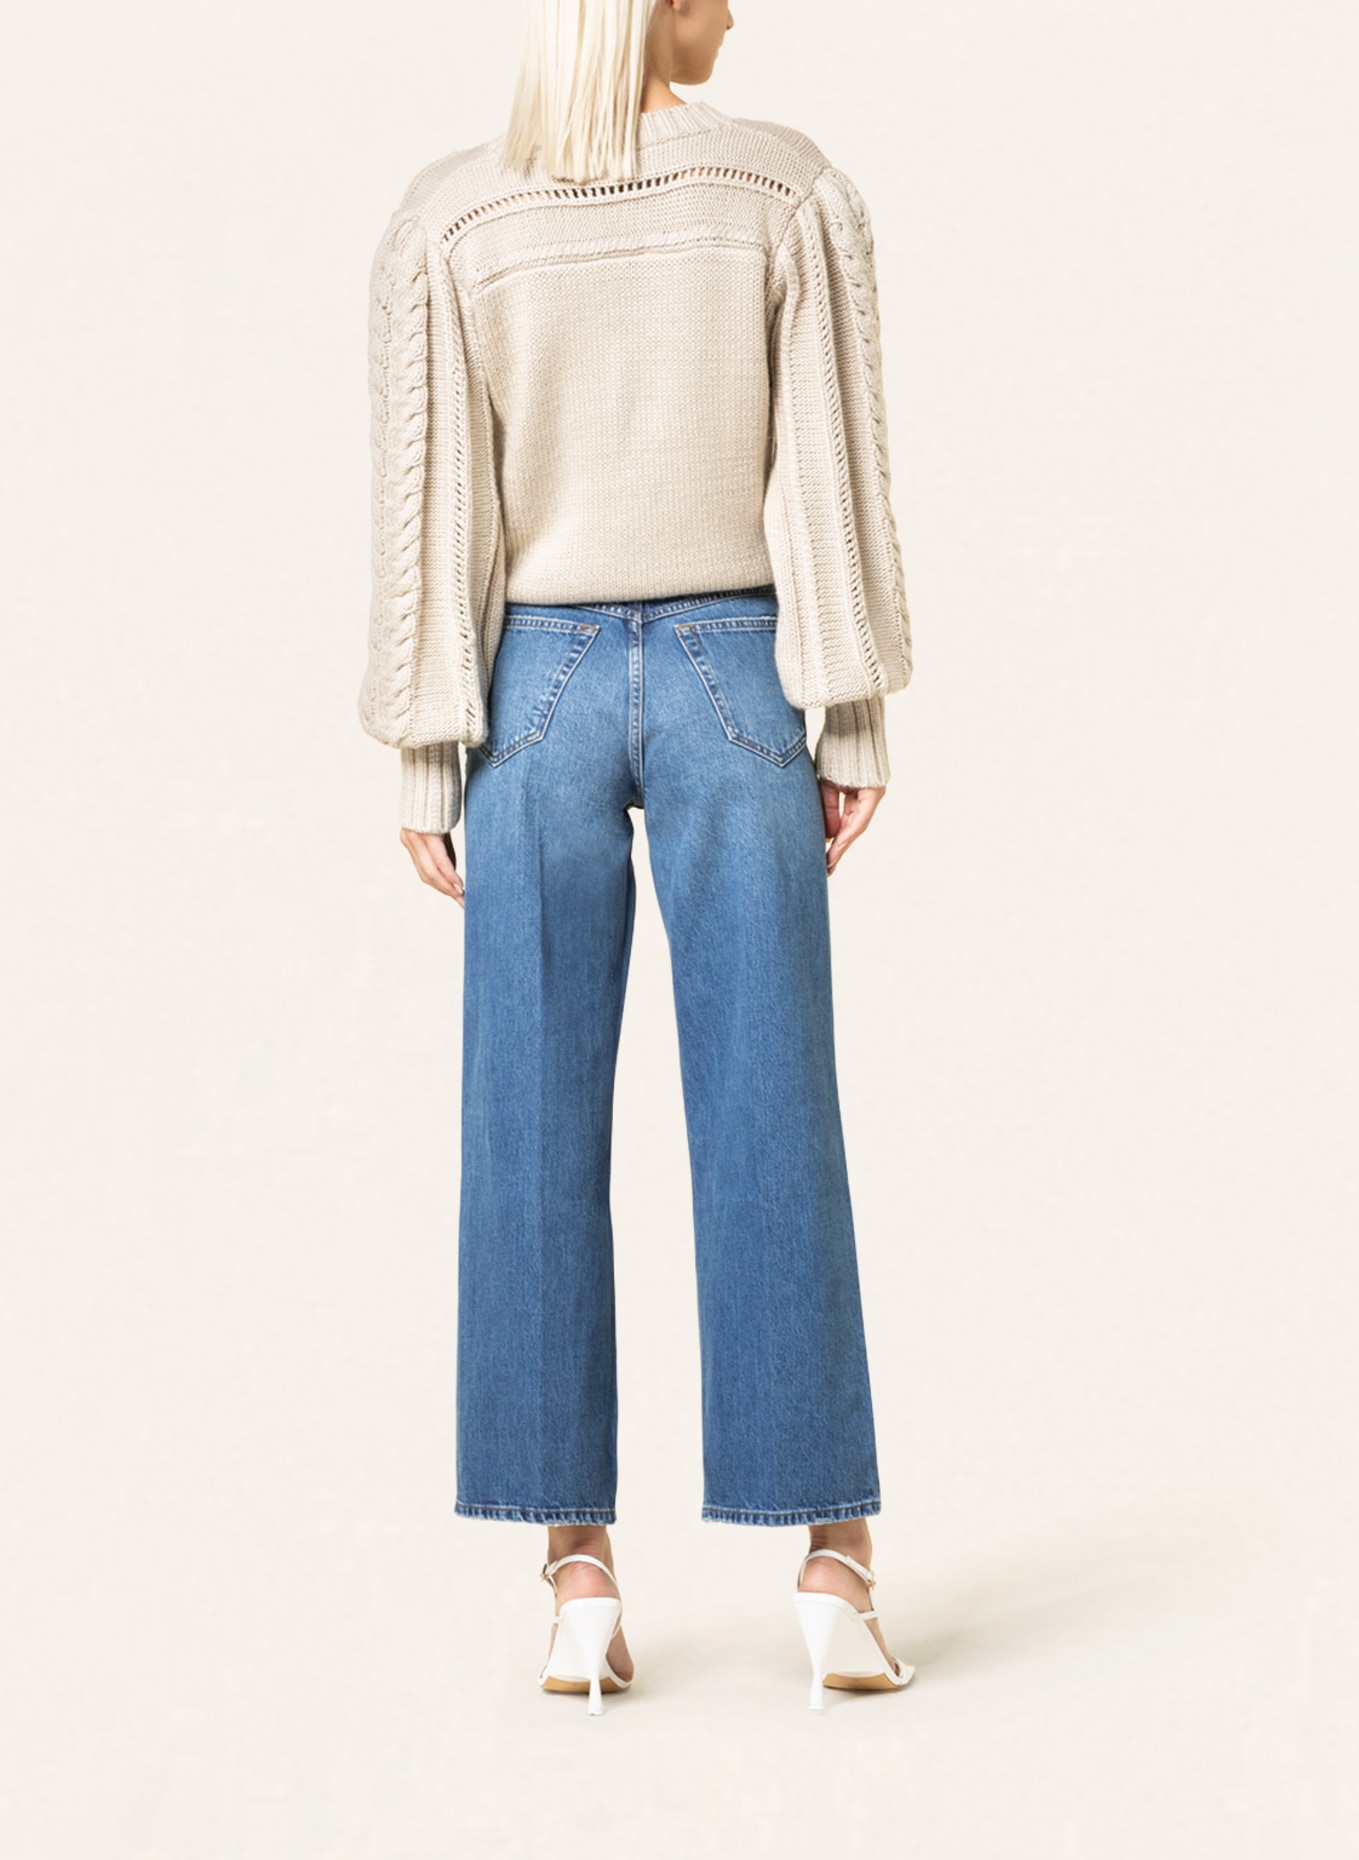 FRAME Jeans-Culotte LE PIXIE HIGH 'N' TIGHT, Farbe: STNL STEARNLEE (Bild 3)